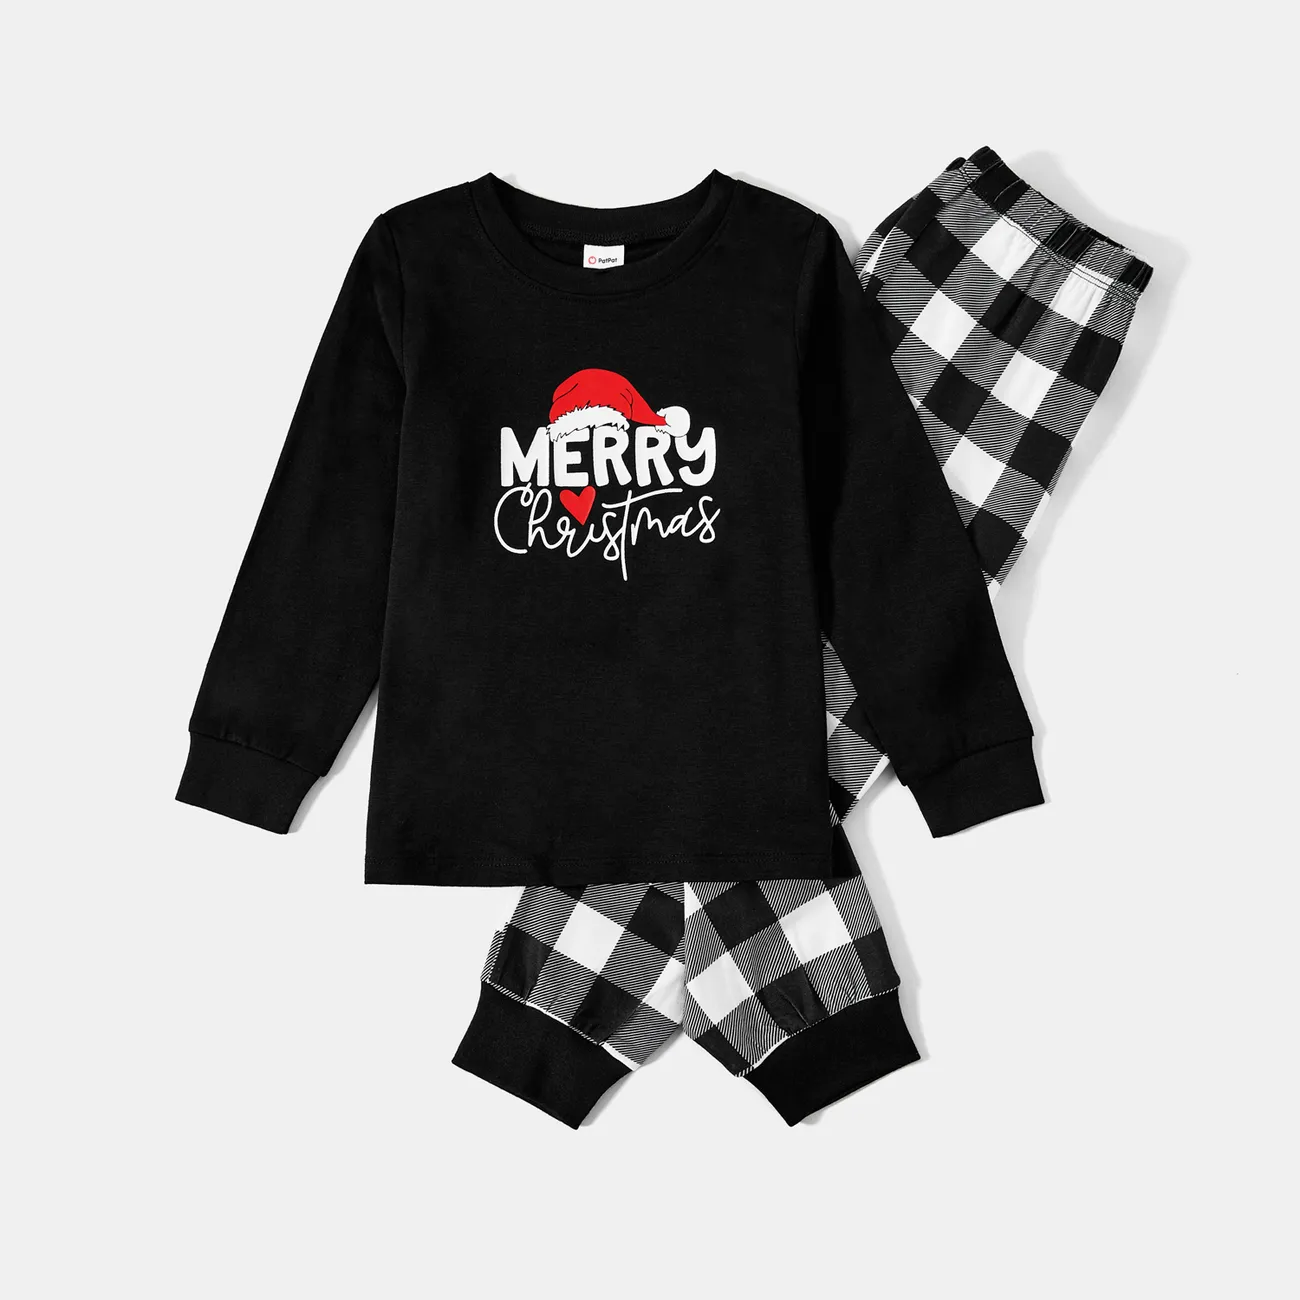 Christmas Family Matching Glow In The Dark Letters Print Long-sleeve Pajamas Sets (Flame resistant) Black/White big image 1